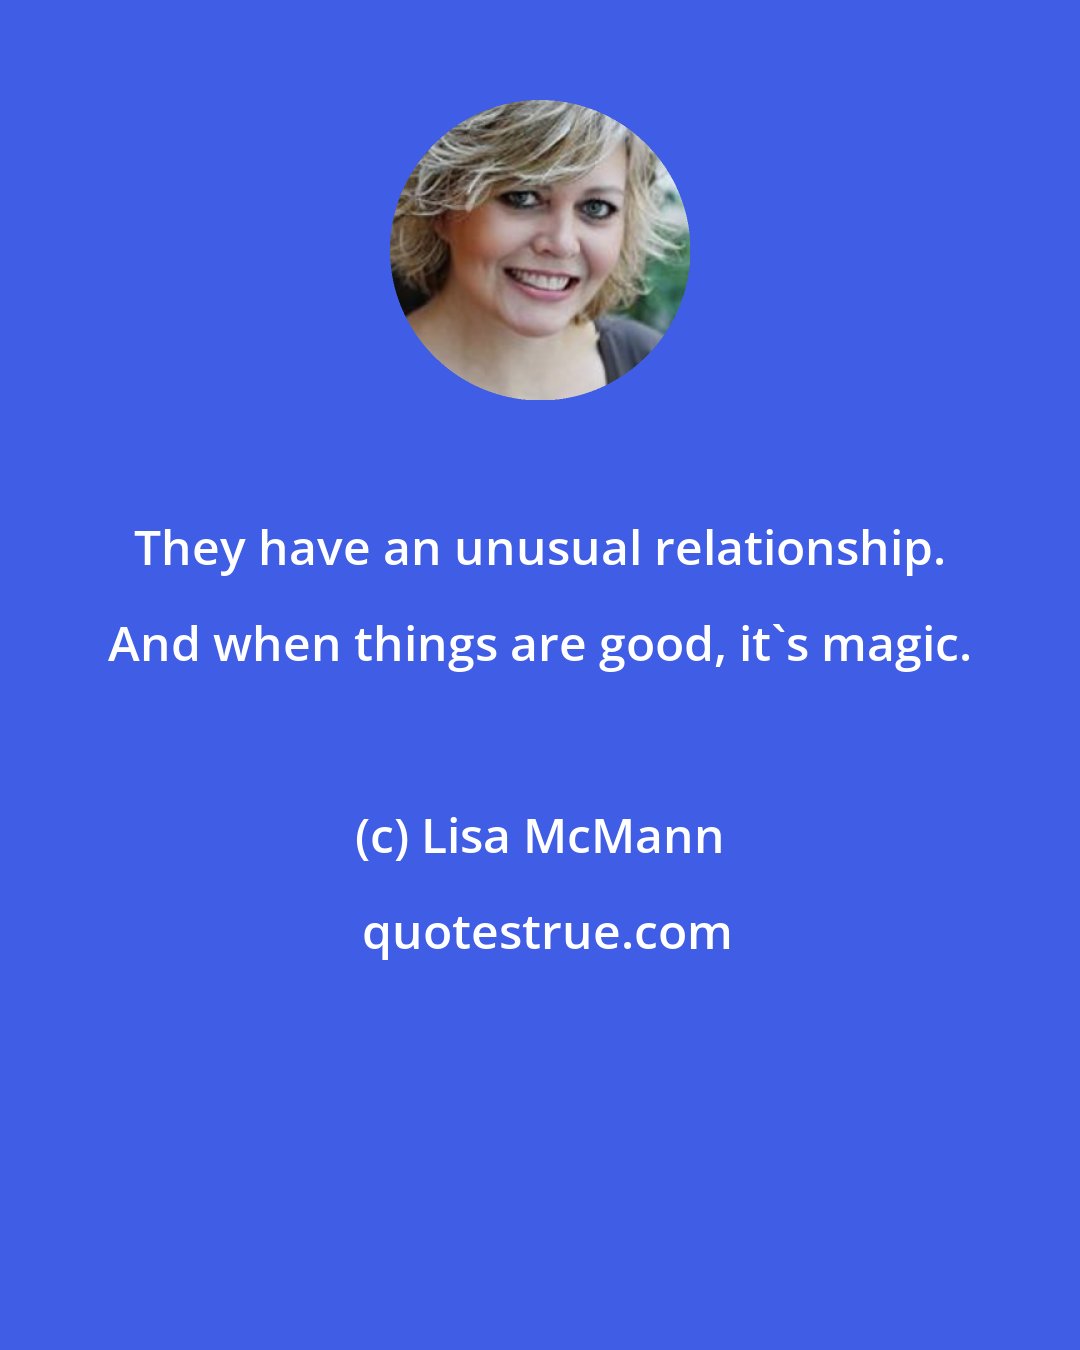 Lisa McMann: They have an unusual relationship. And when things are good, it's magic.